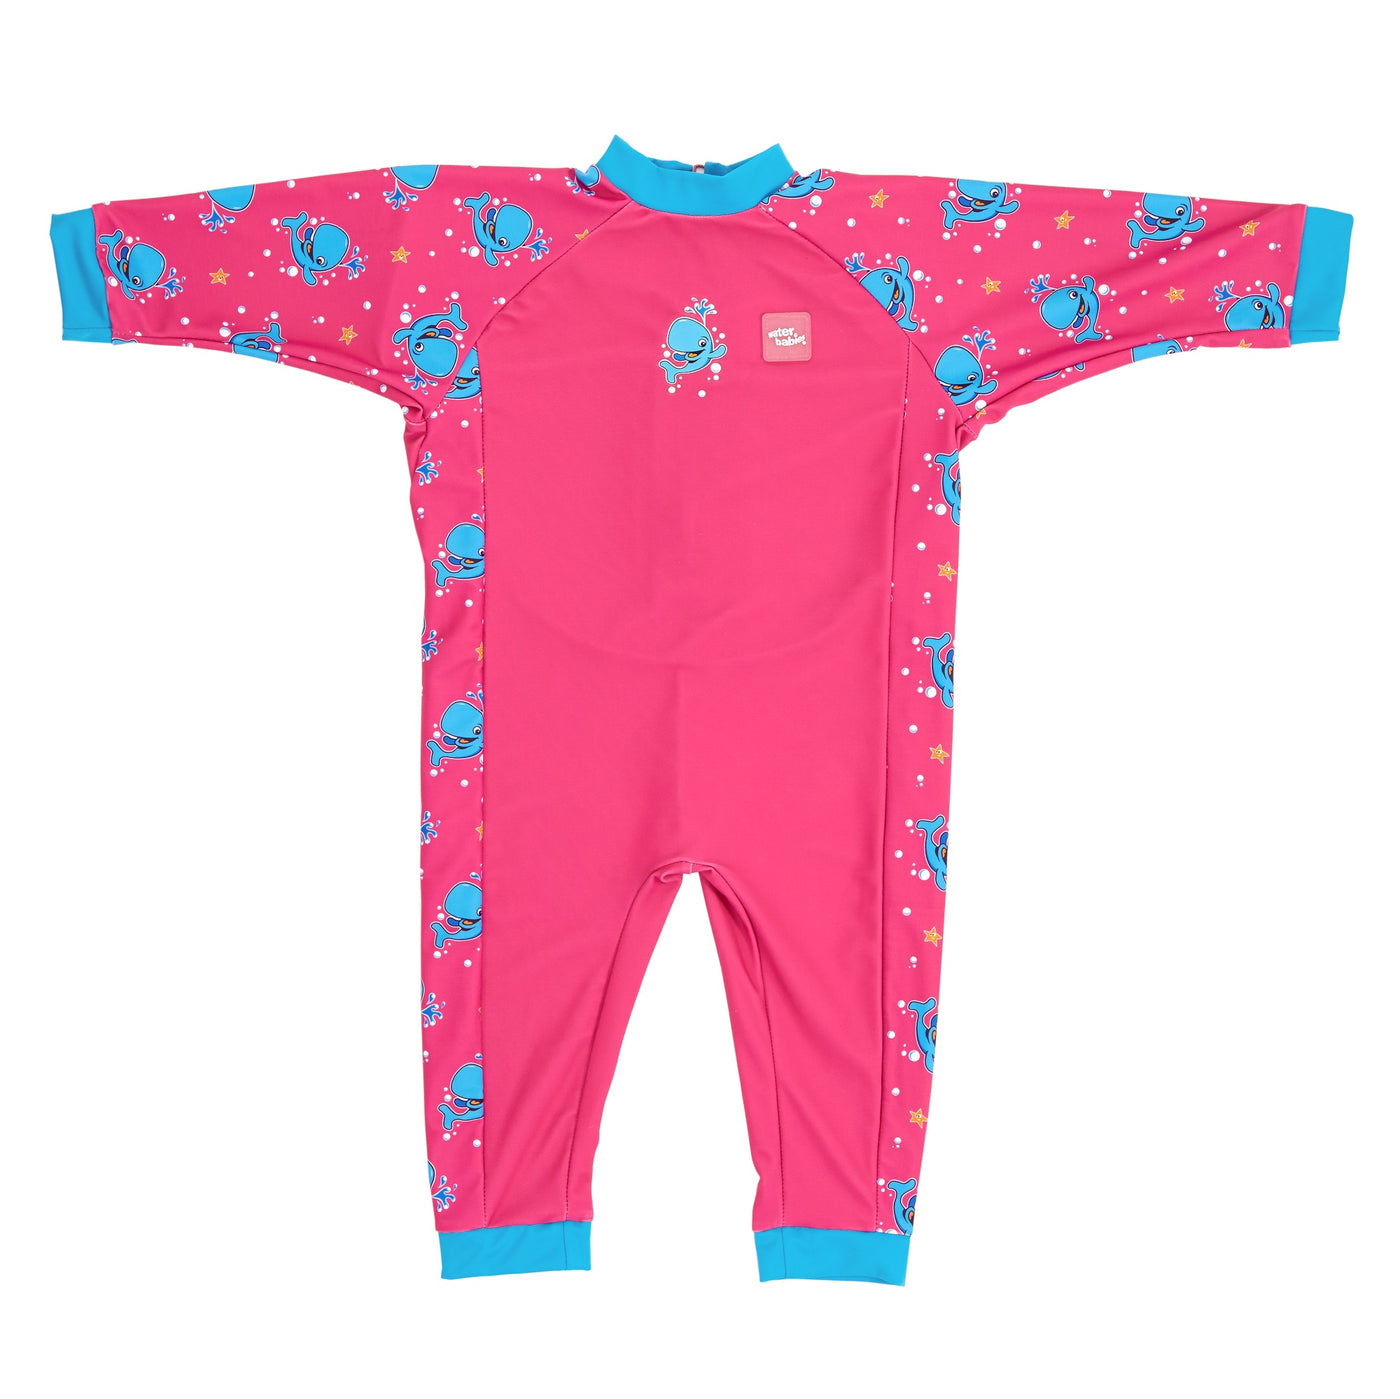 One piece baby UV sunsuit in pink Bubba the Whale print